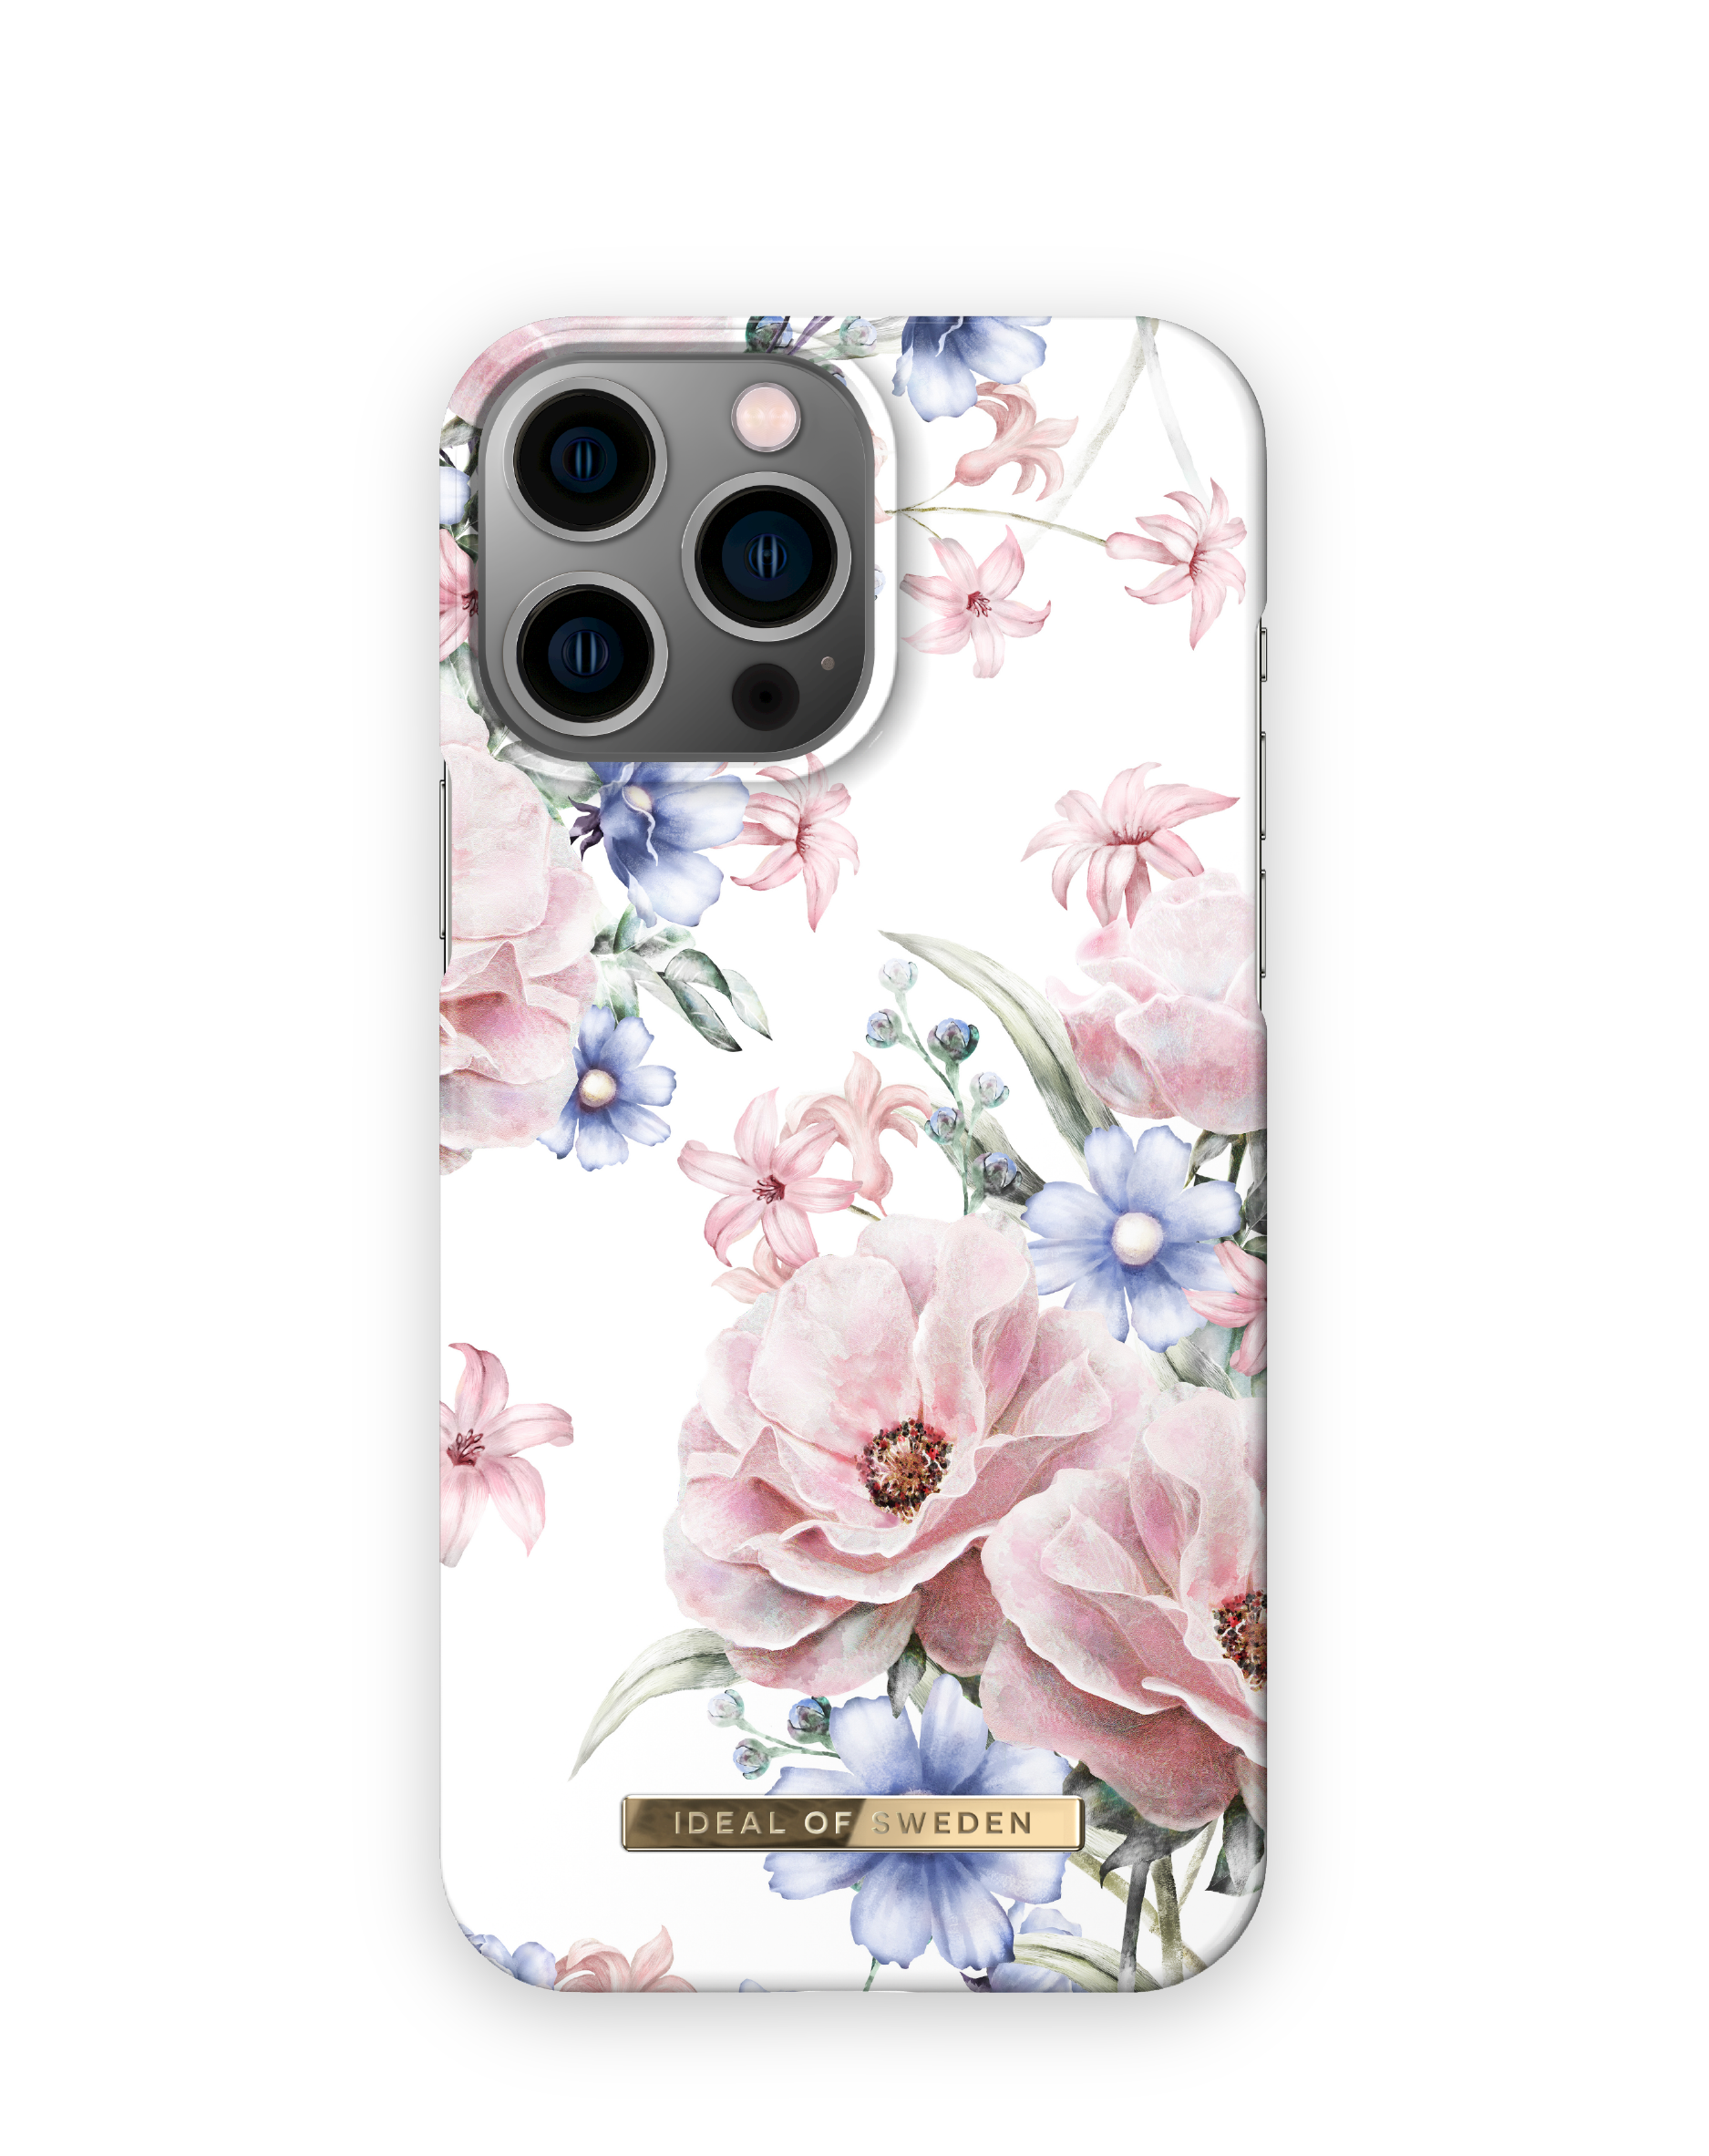 iPhone Pro Apple, OF IDFCSS17-I2267P-58, IDEAL SWEDEN Max, Floral Romance Backcover, 14